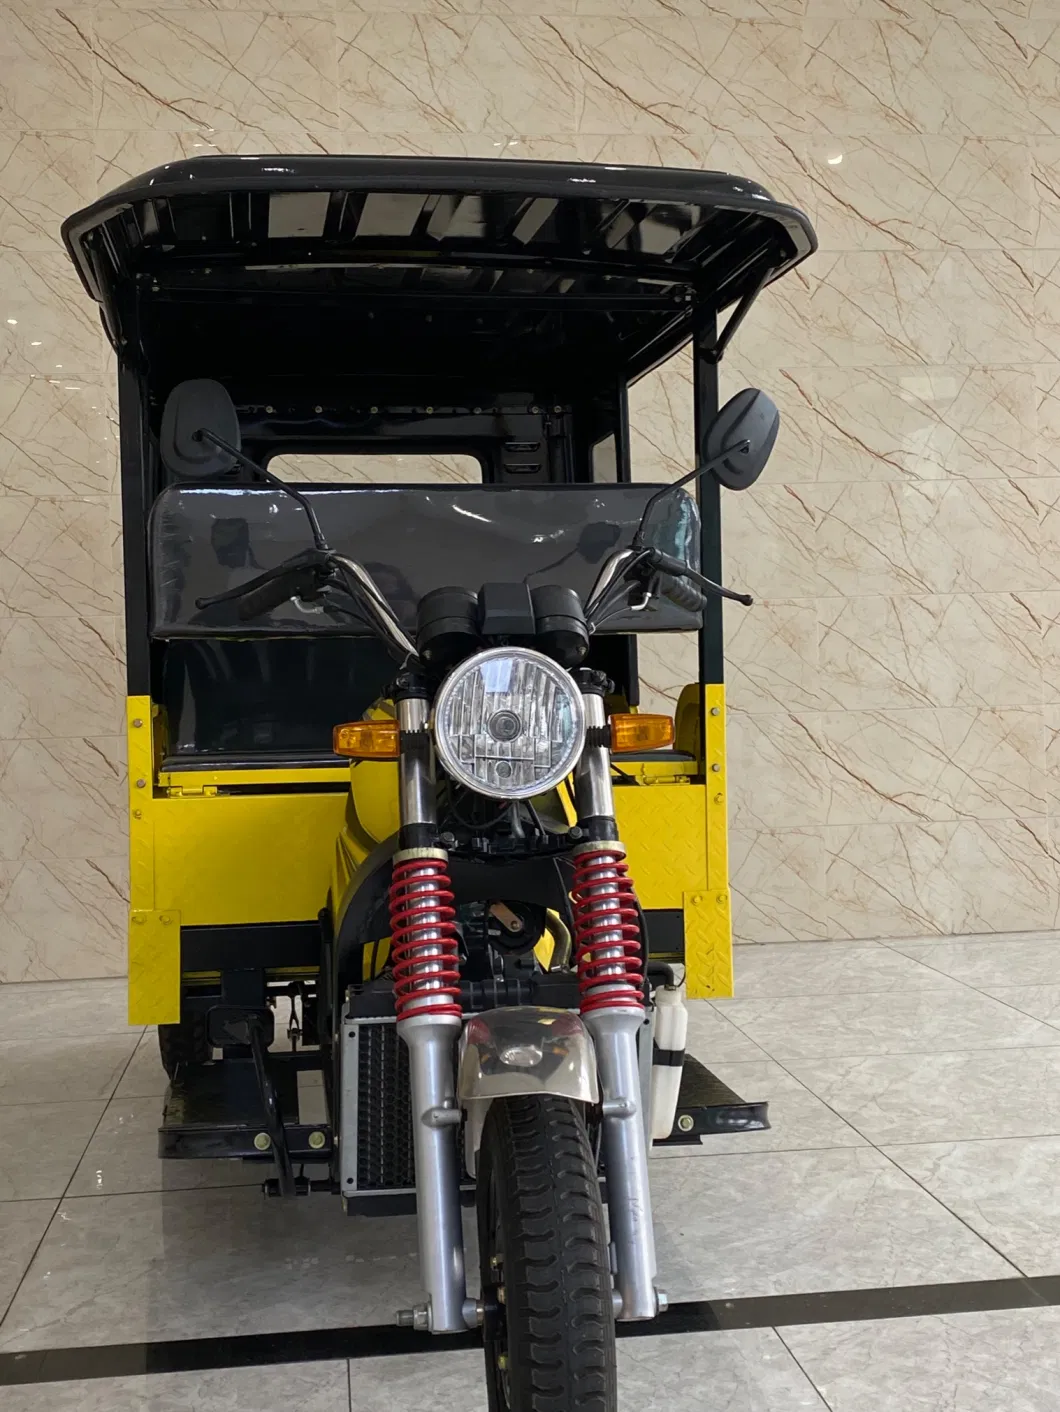 Watercooling Motorized Tuktuk in Cambodia Auo Rickshaw/Gasoline Taxi/Tricycle for Adults